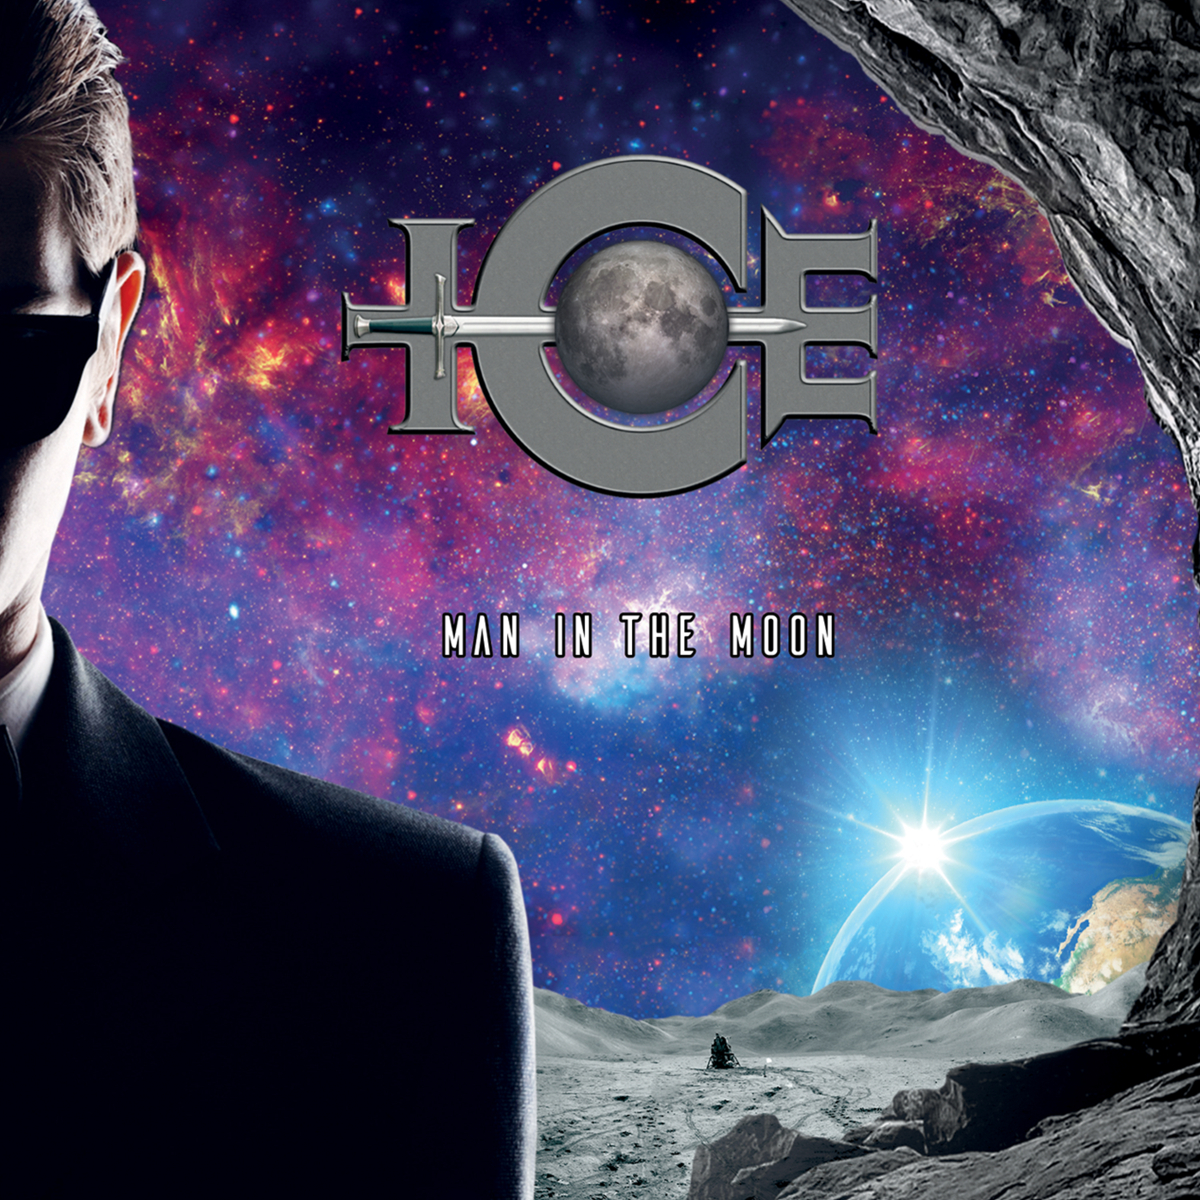 ICE – Man in the Moon